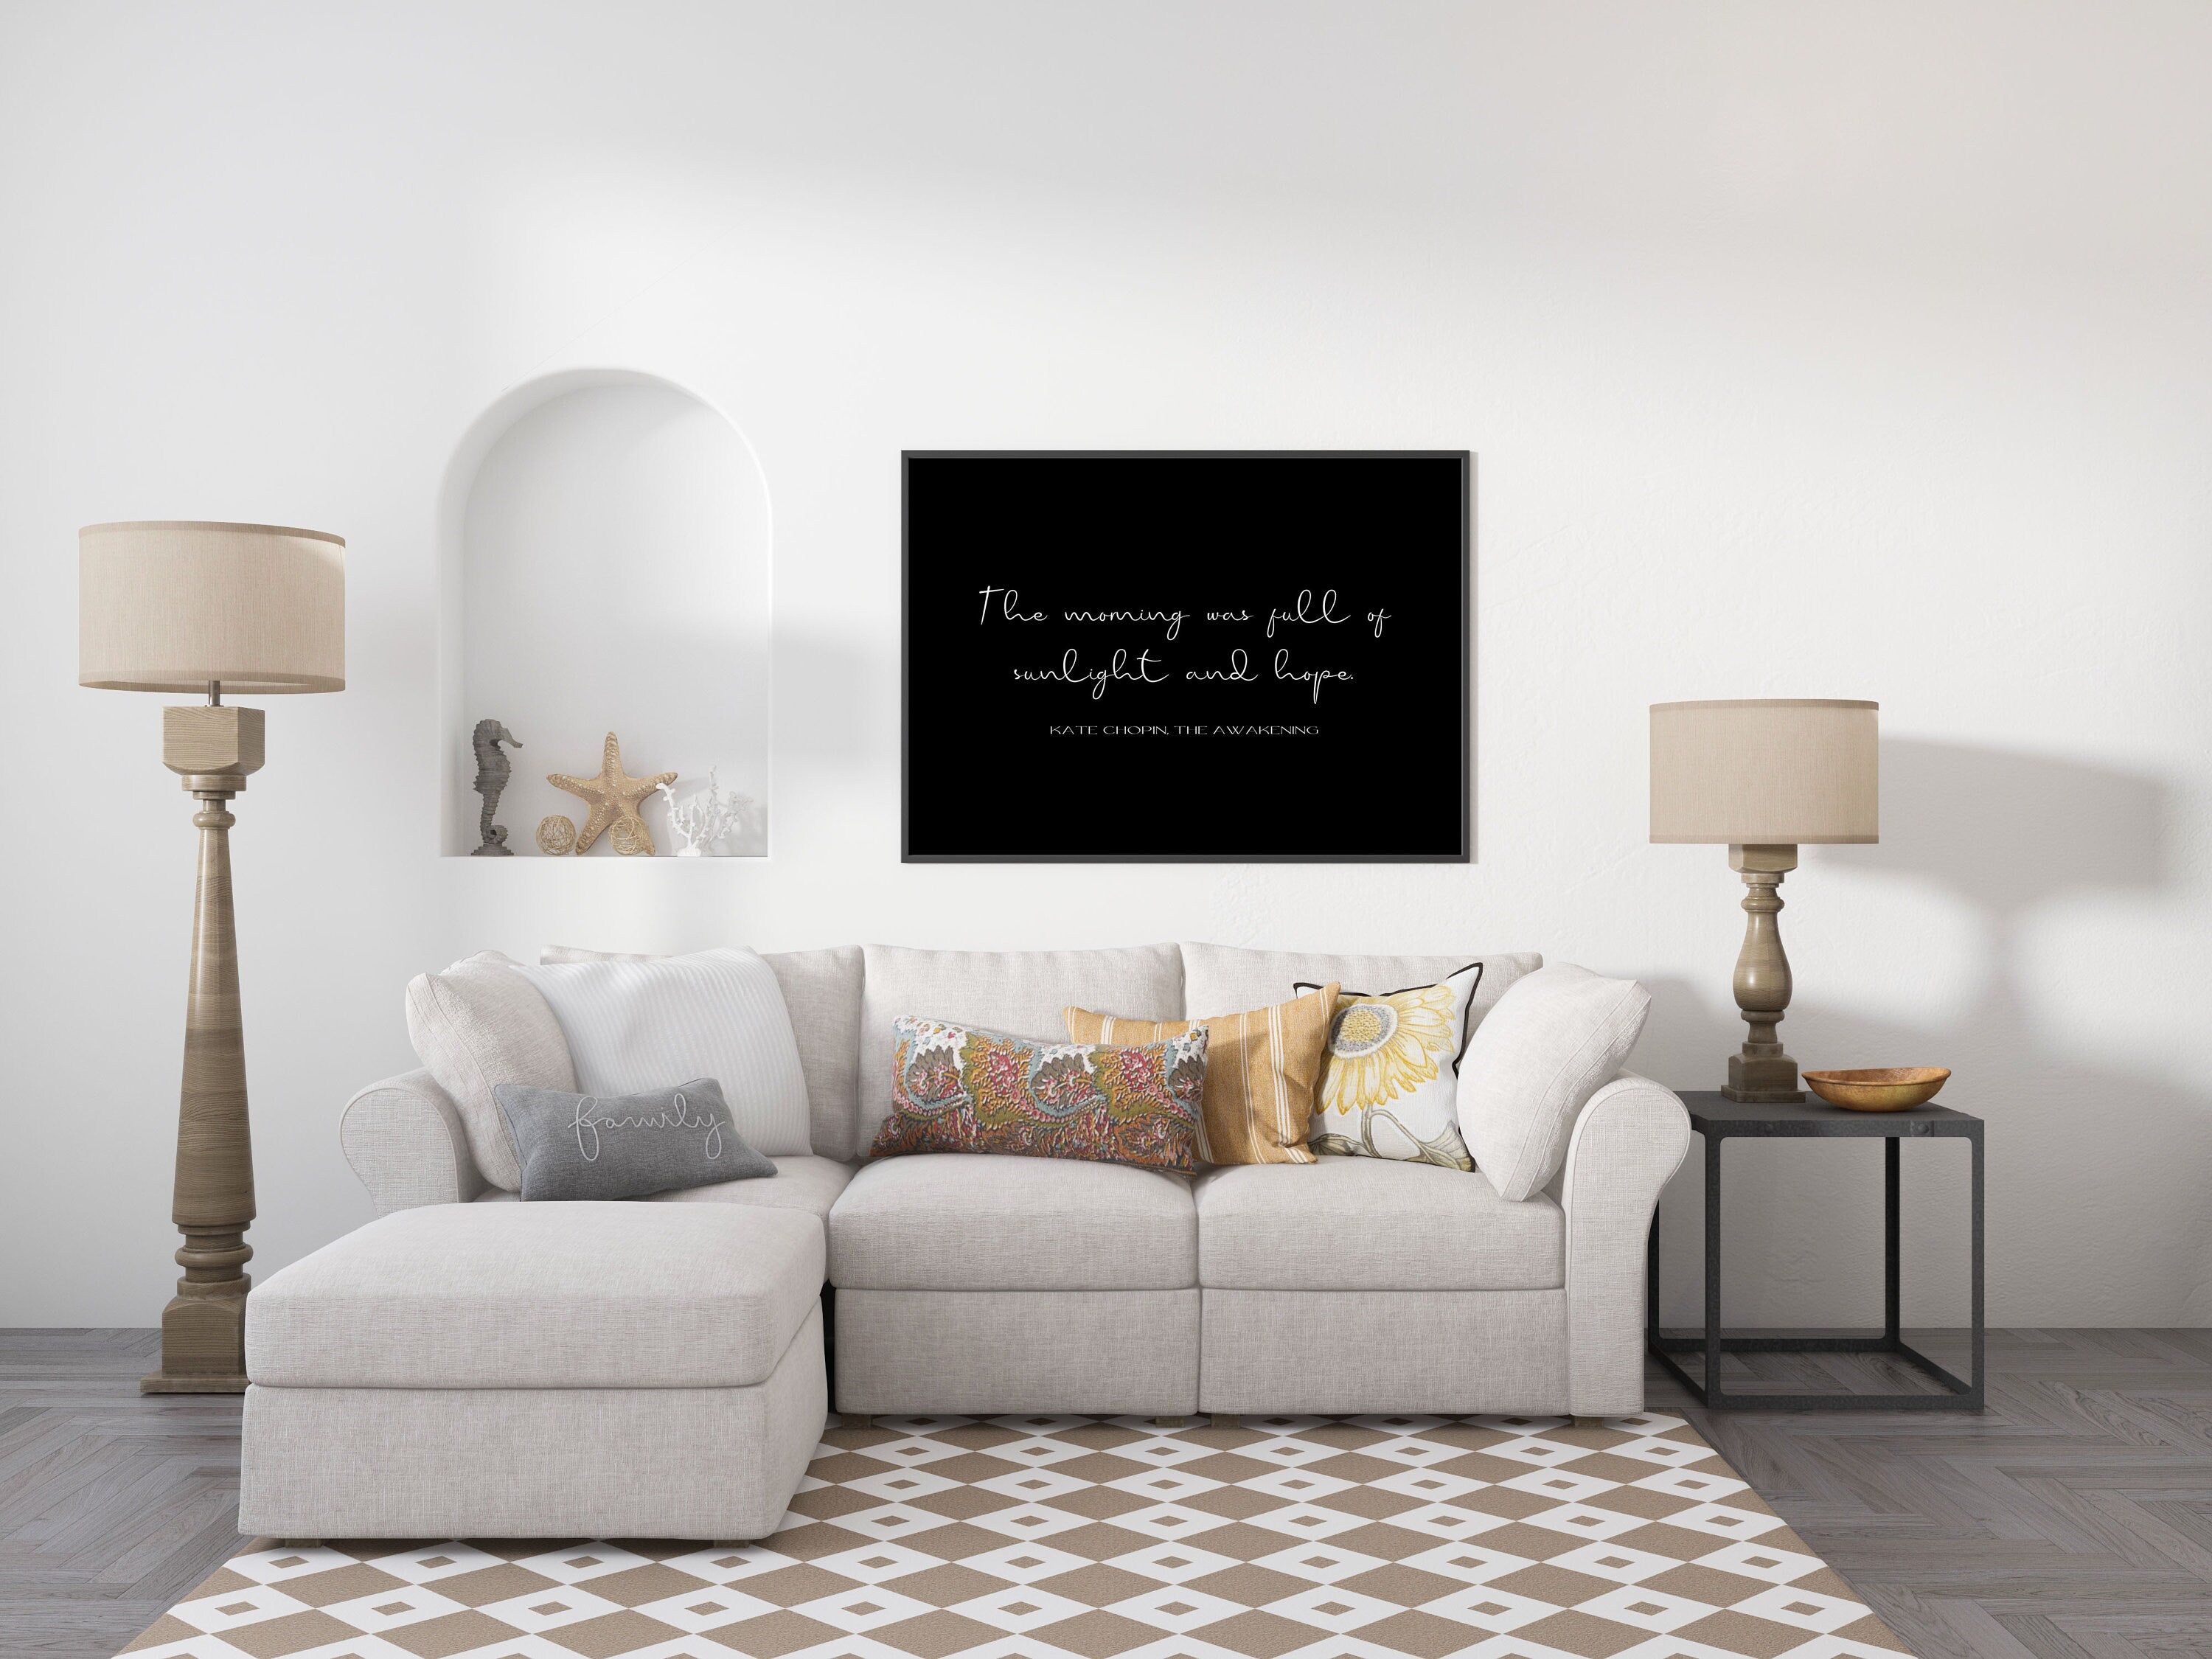 Sunlight & Hope The Awakening Quote Inspirational Print Gift, Kate Chopin Black and White Unframed Wall Art Prints for Living Room or Office